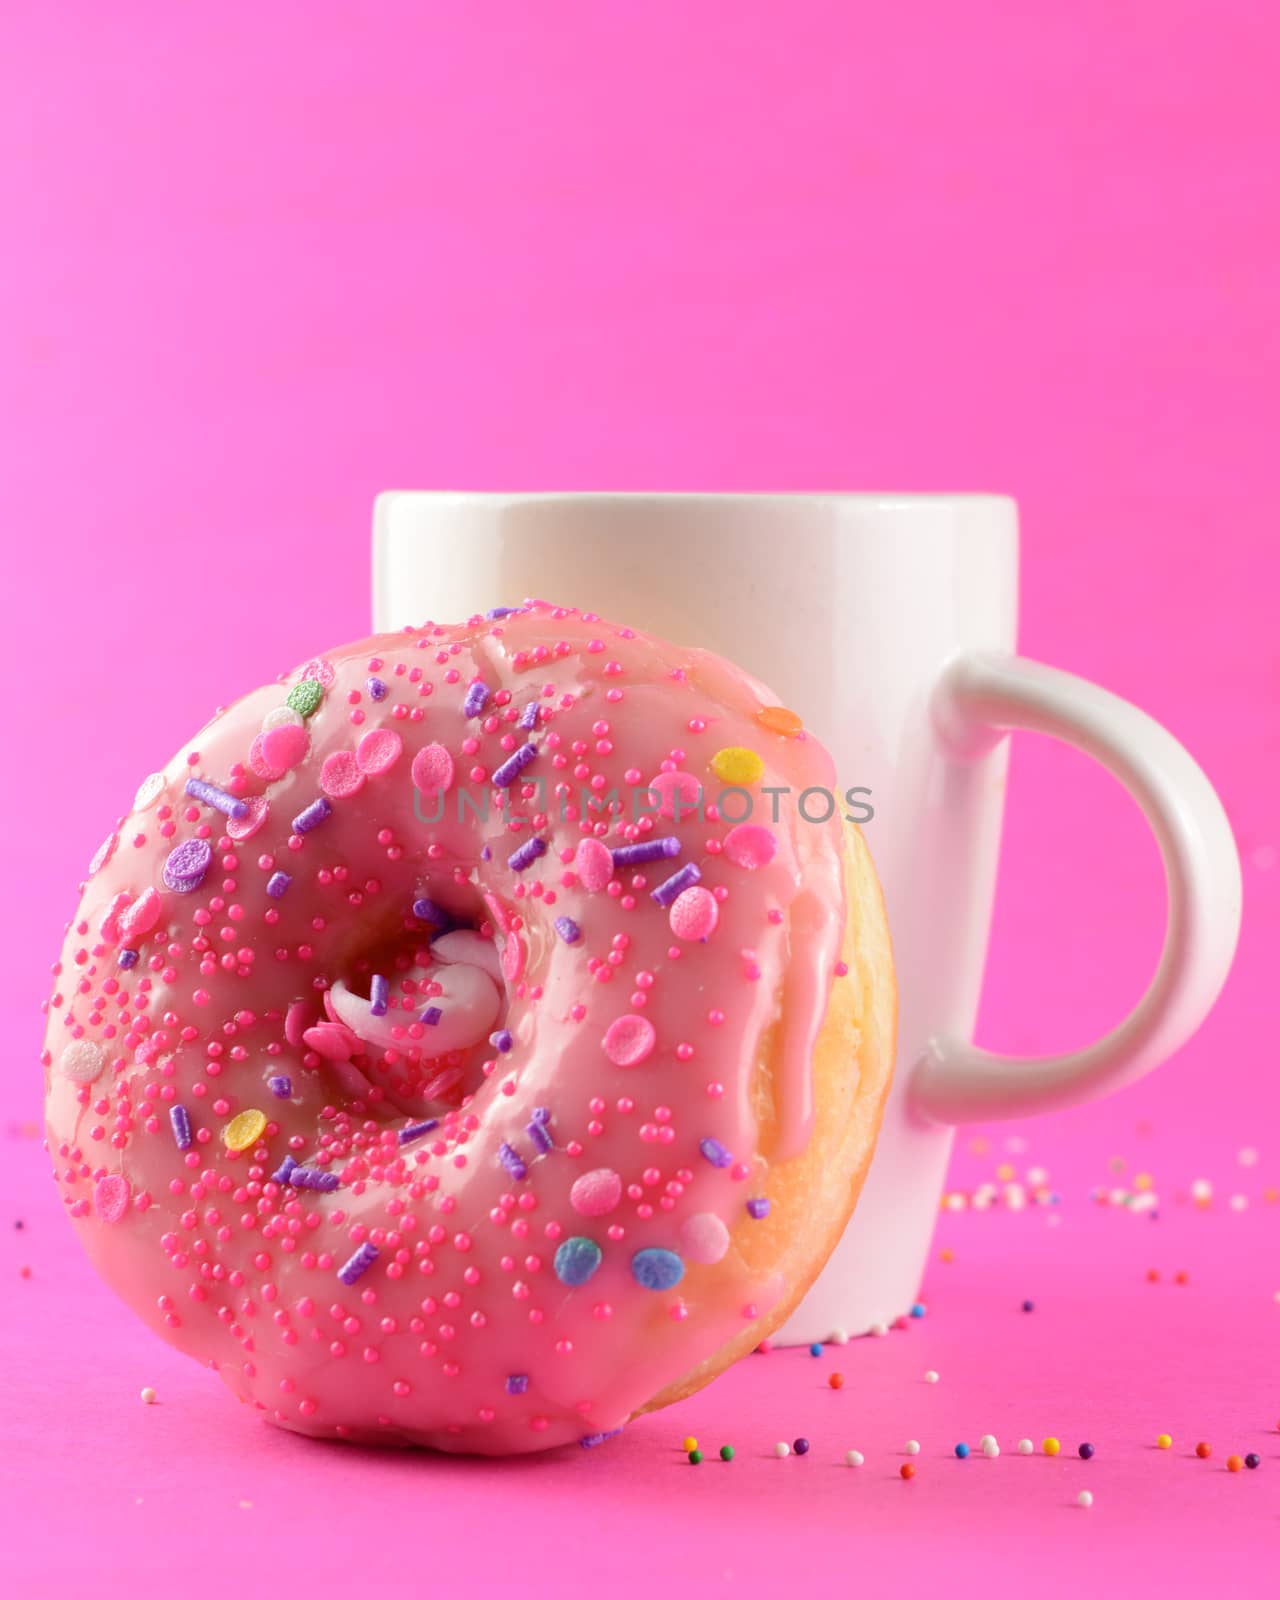 A coffee cup and donut over a pink background.